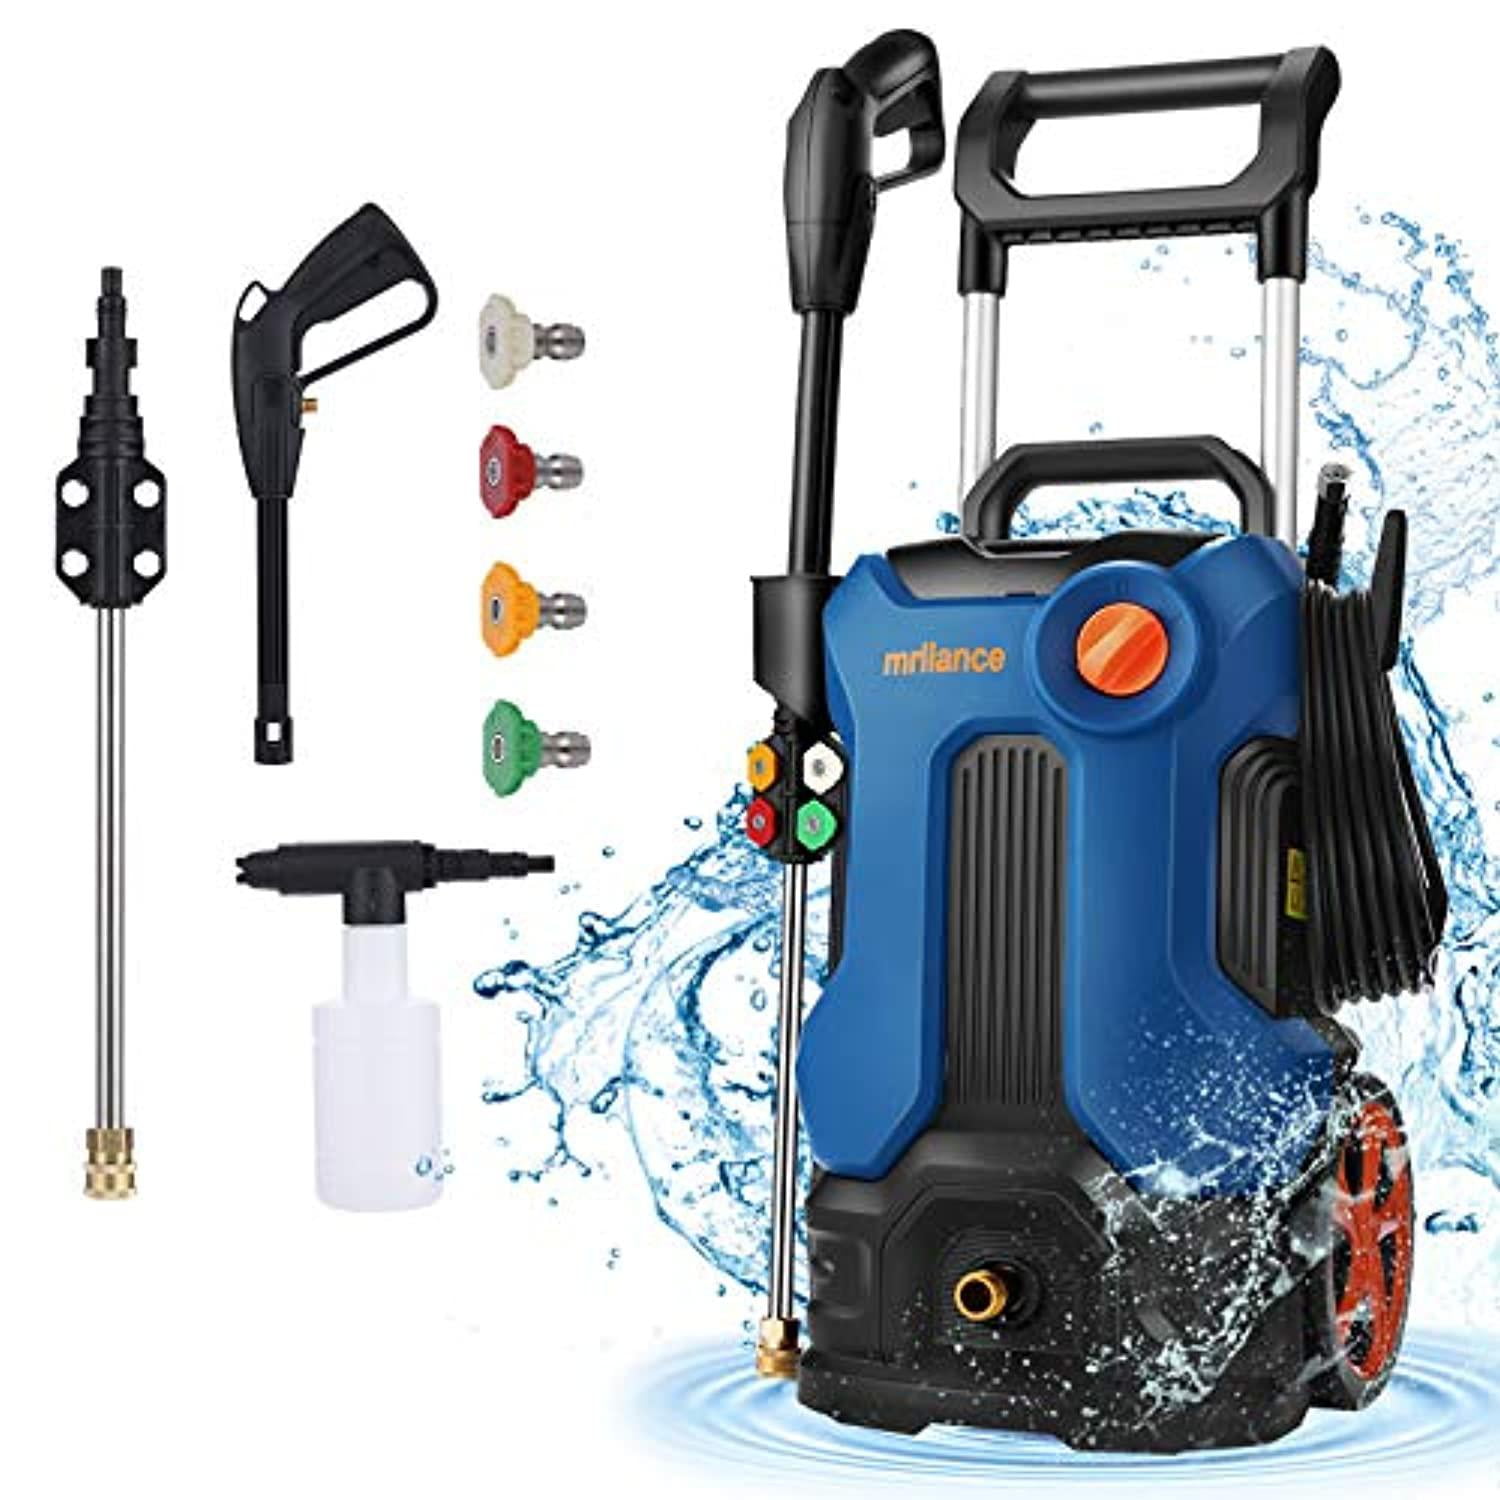 mrliance Electric Pressure Washer Blue Electric Power Washer with 5 Nozzles High Pressure Washer Perfect for Cleaning Cars Houses Driveways Fences Patios Garden